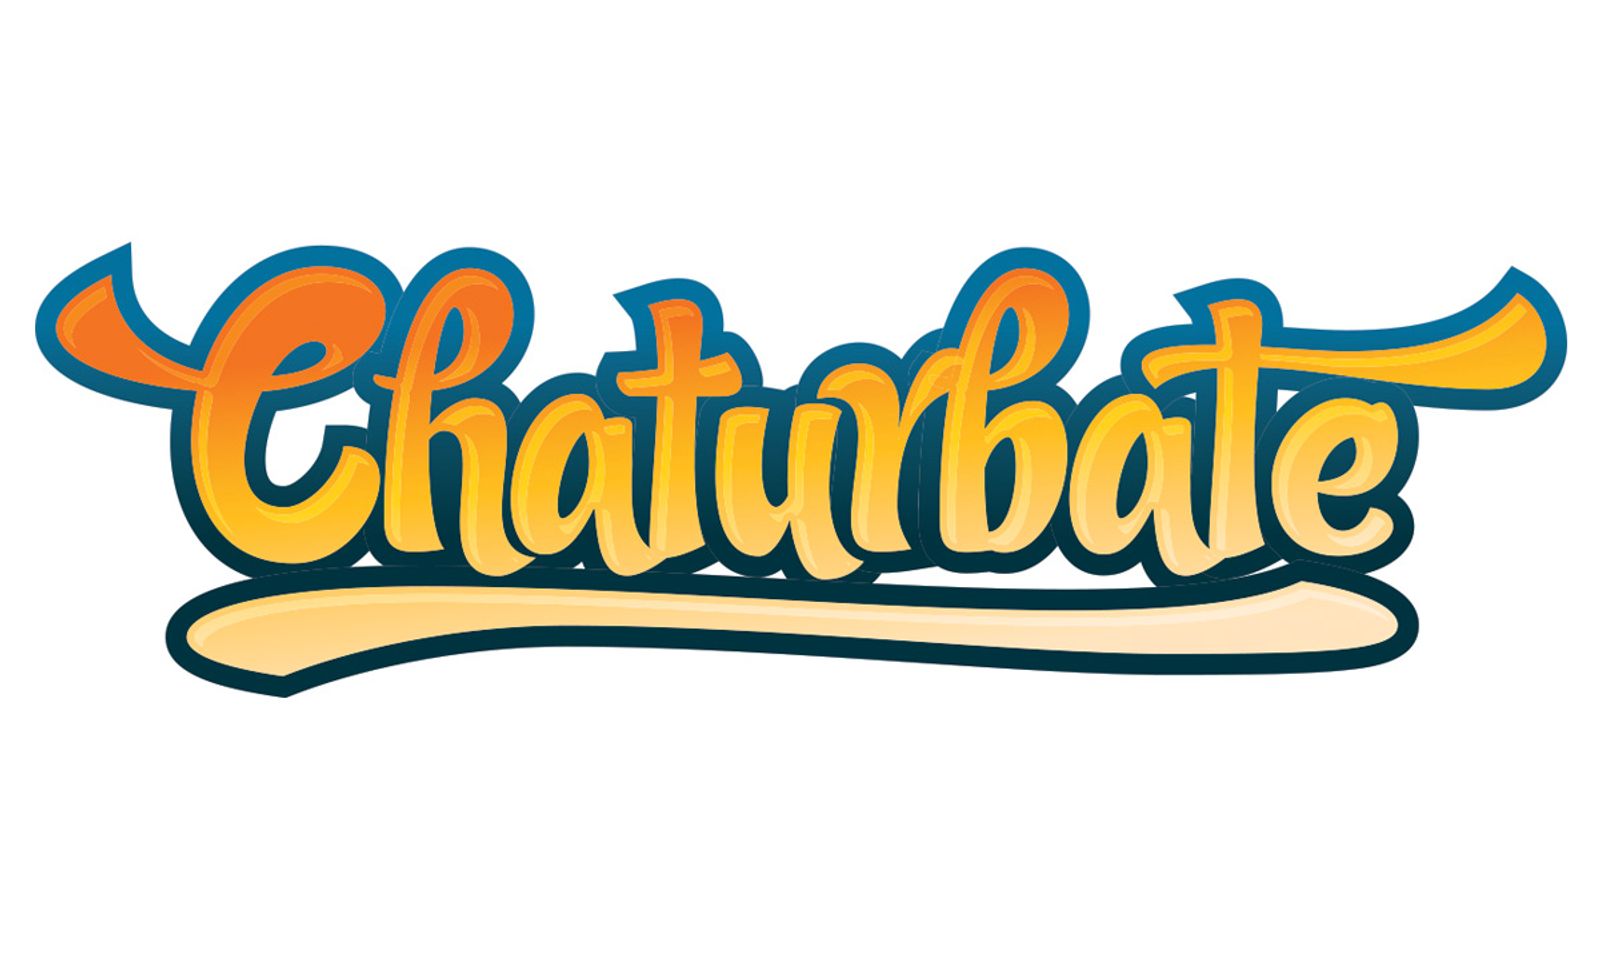 Chaturbate Receives Nomination for 2013 AVN Awards